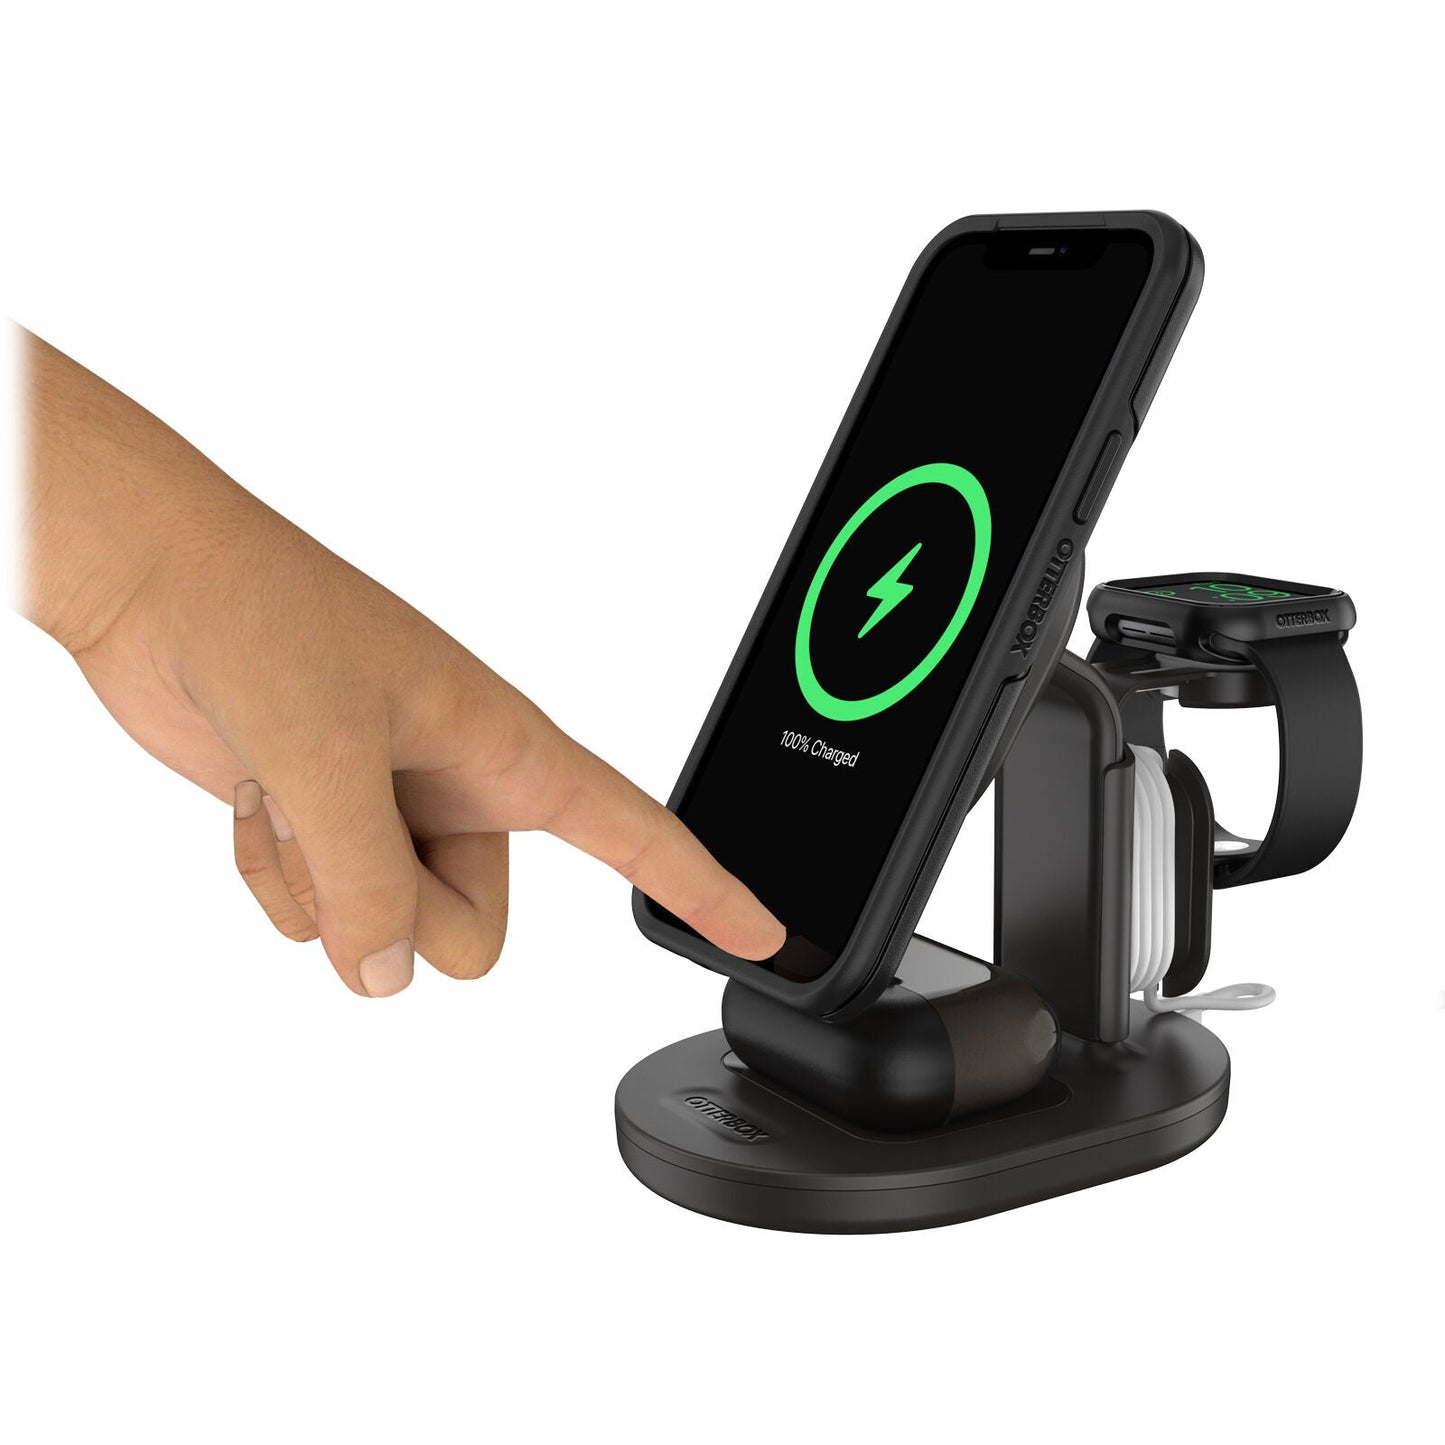 OtterBox 3-in-1 Multi-Device Wireless Charging Stand - maplin.co.uk